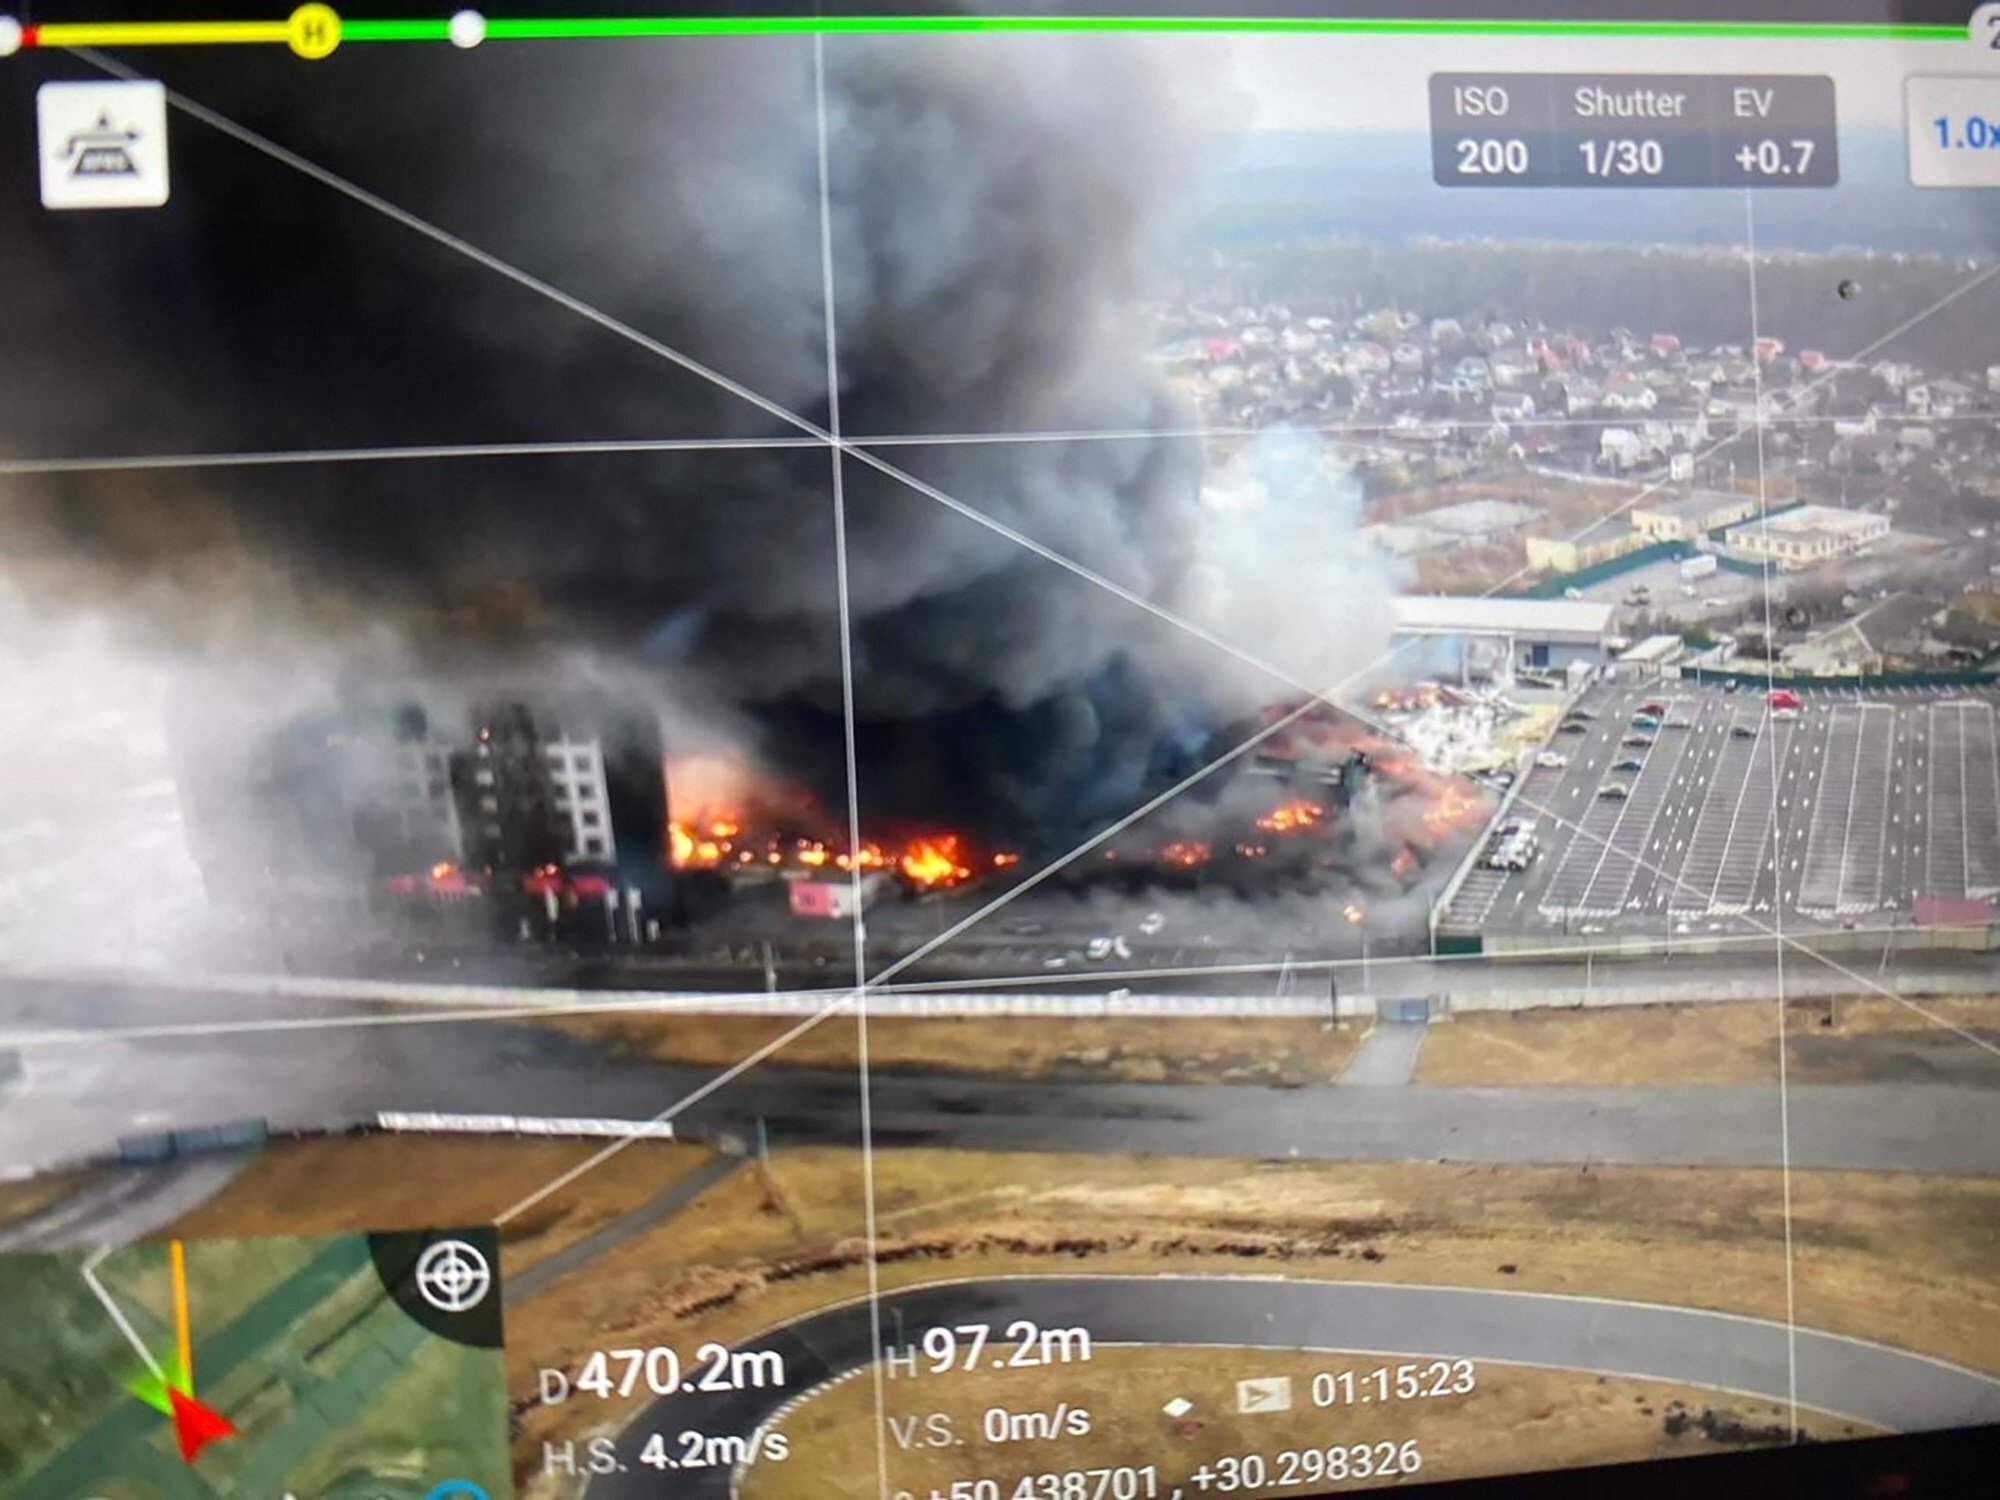 An image taken by a drone shows a blown-up building near the outskirts of Kyiv, Ukraine. Photo: Ukrainian Security Forces via AP